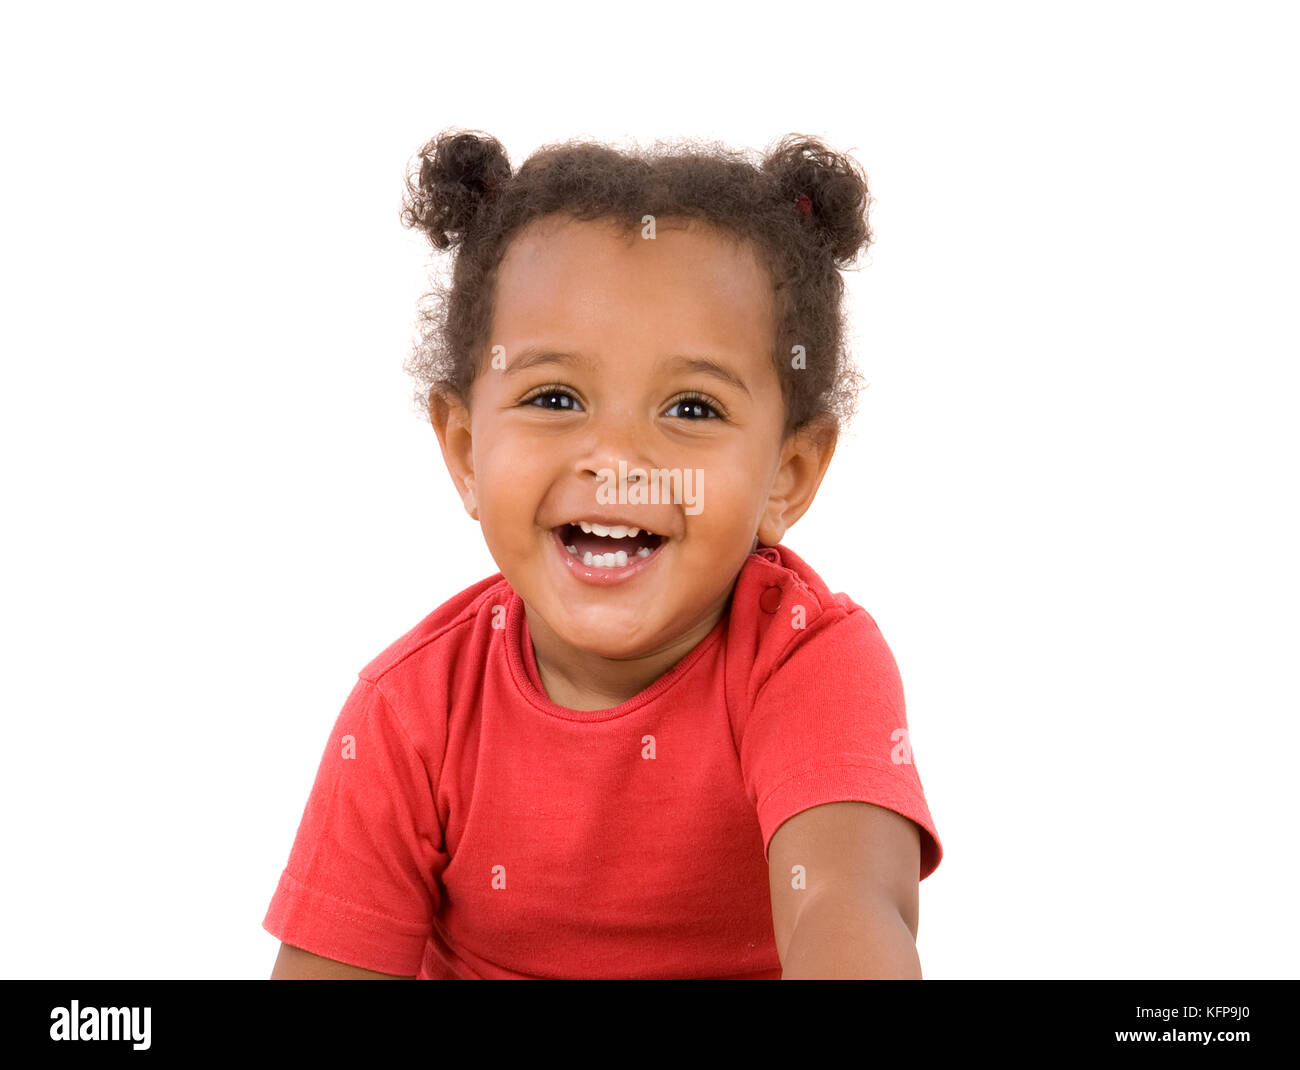 Small african baby with one year old isolated on a white background Stock Photo